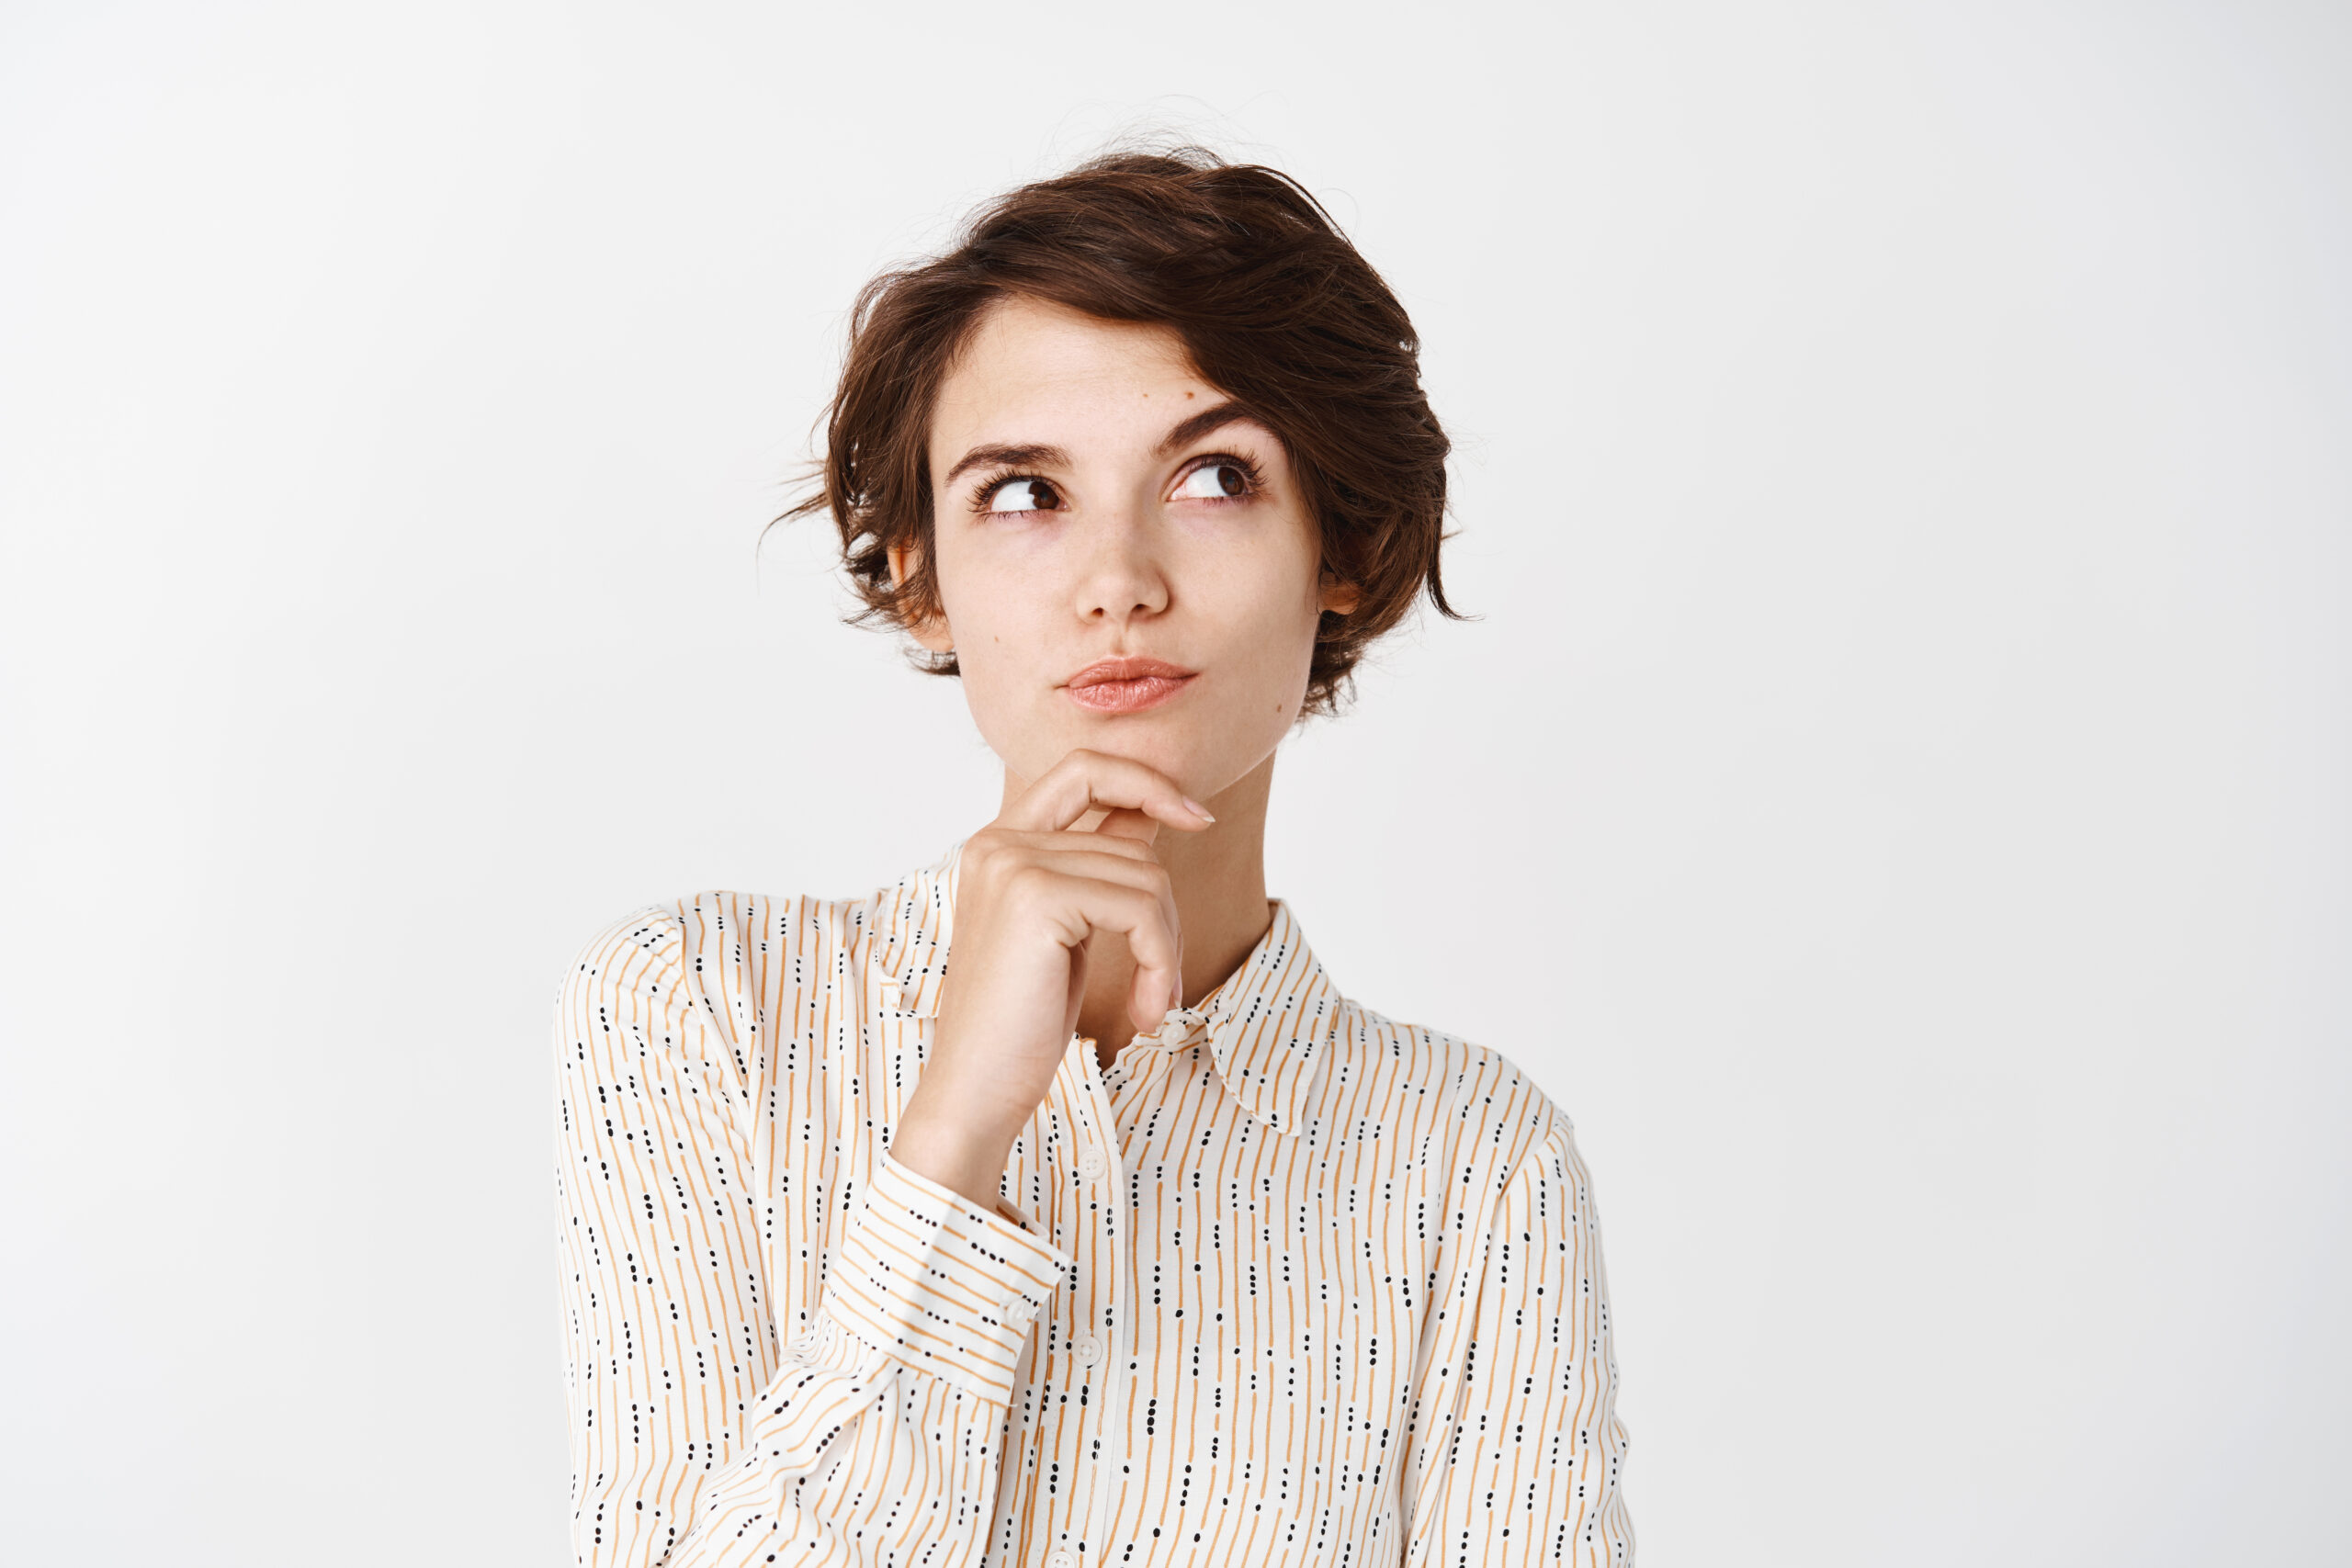 Pensive girl in blouse touching chin, looking at upper right corner and thinking, making choice, standing over white background. Copy space